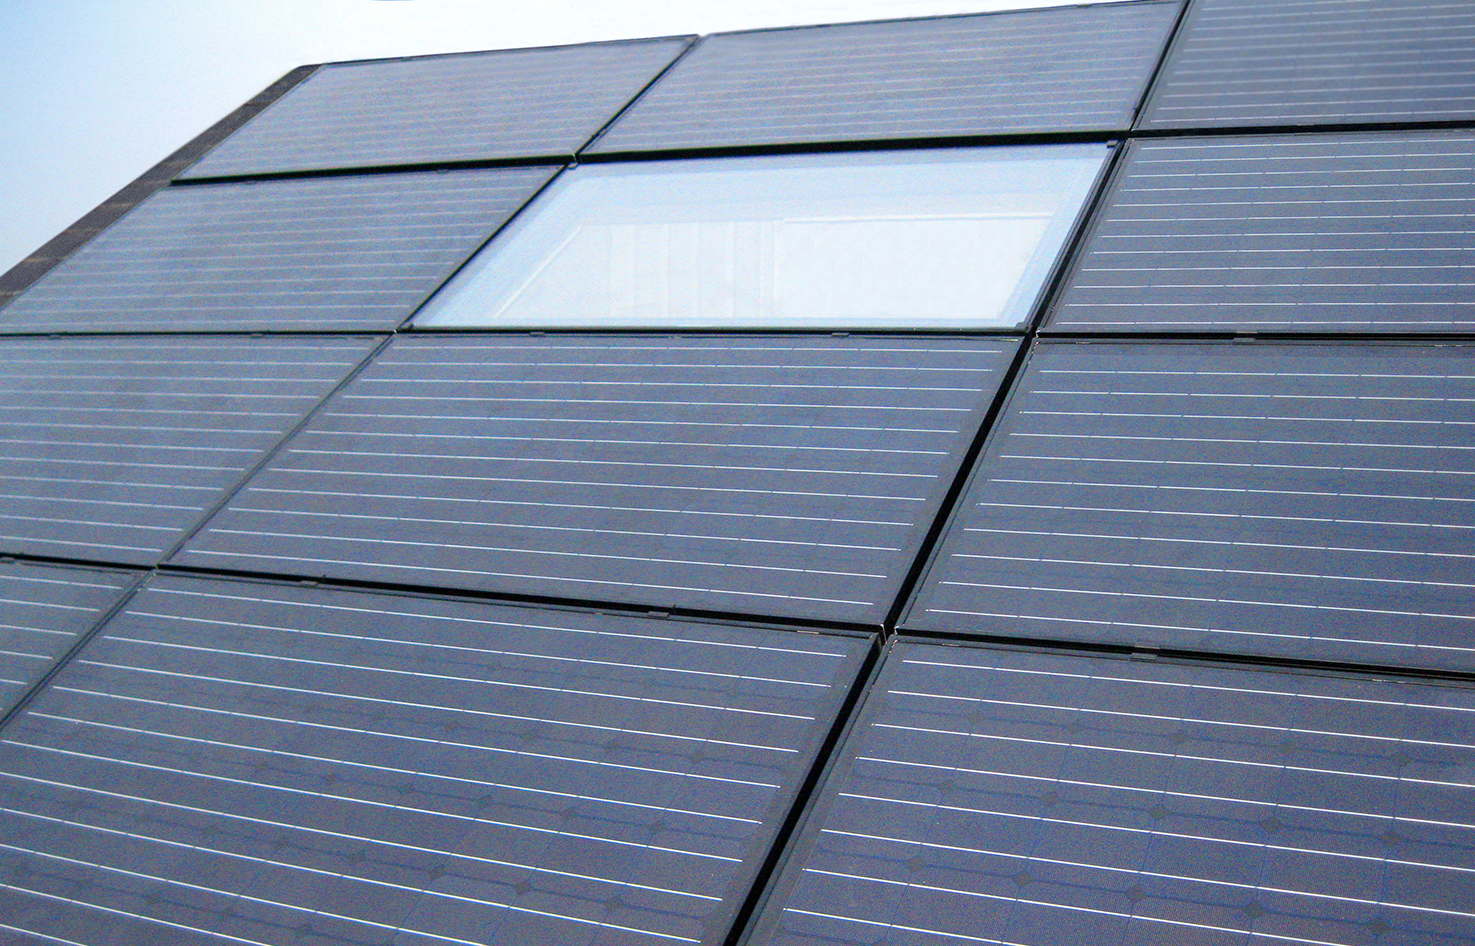 Rooflight surrounded by solar panels - Teddington House. Contractor Hub: Solutions